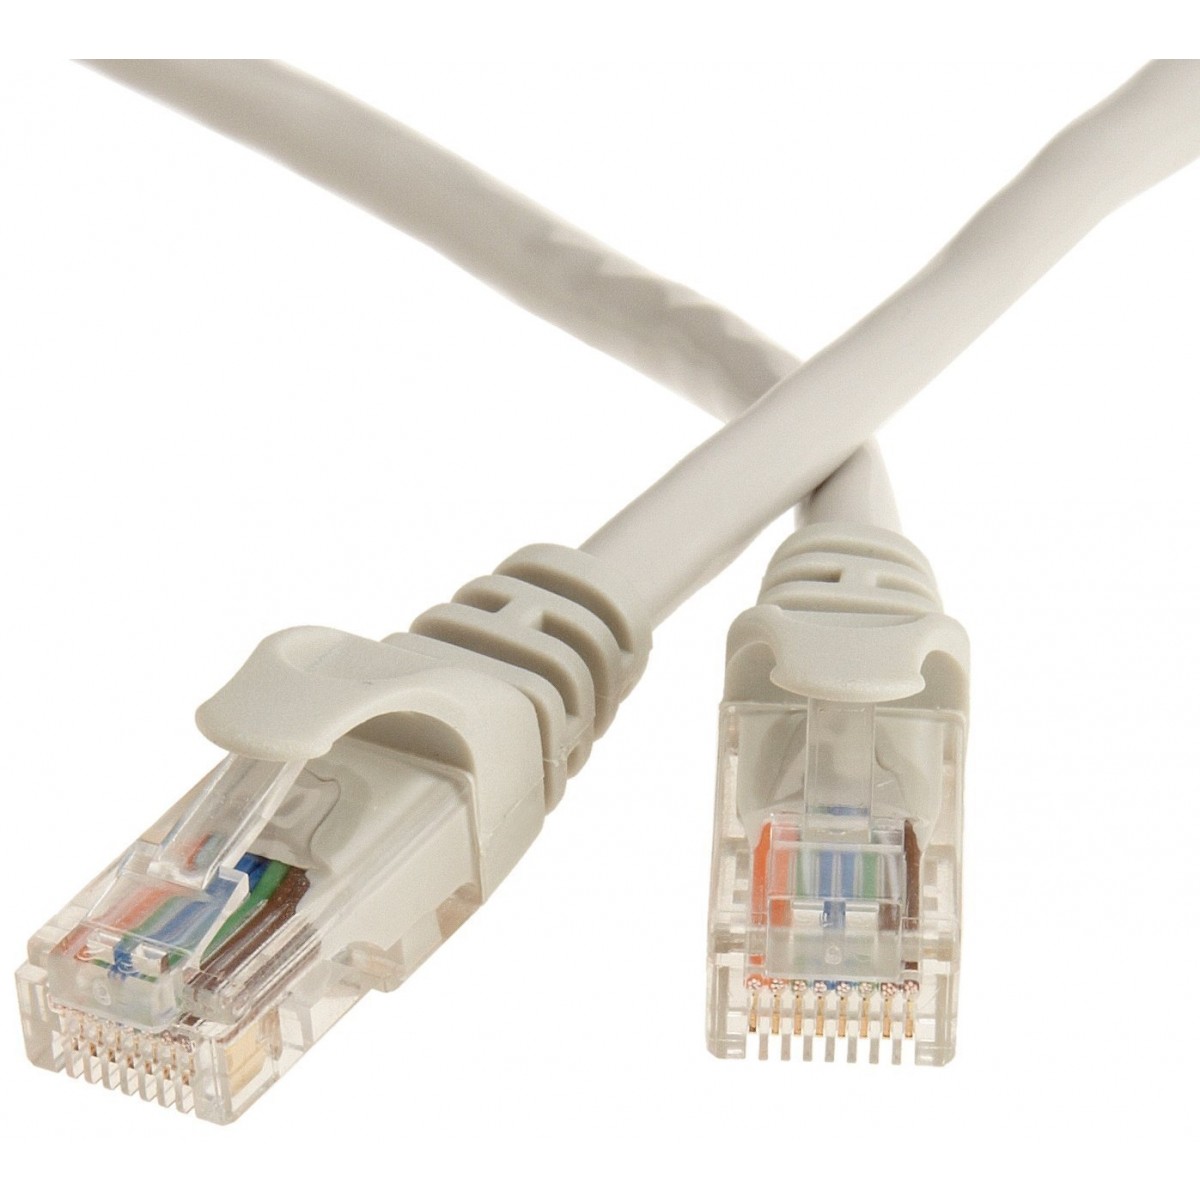 CAT5e cable 20ft Network cable Network